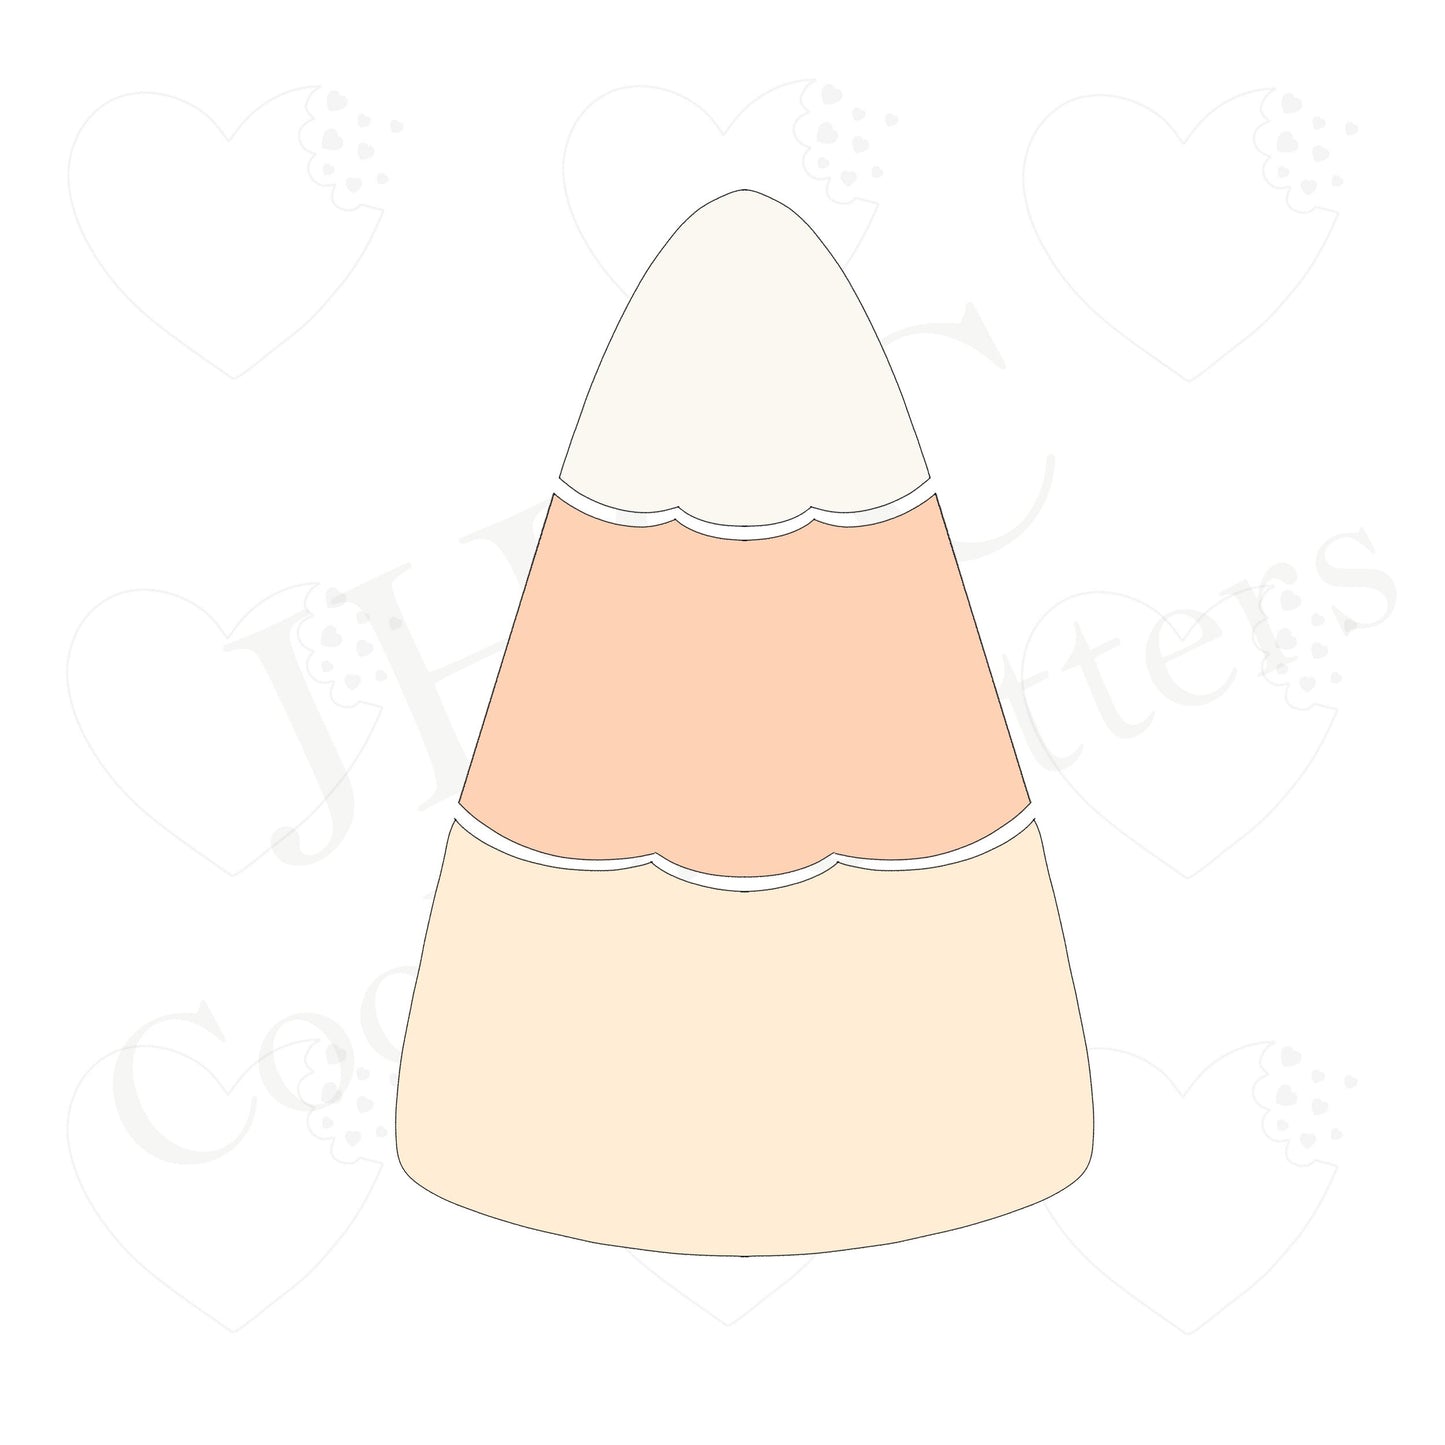 3 Piece Candy Corn OR Christmas Tree - Cookie Cutter